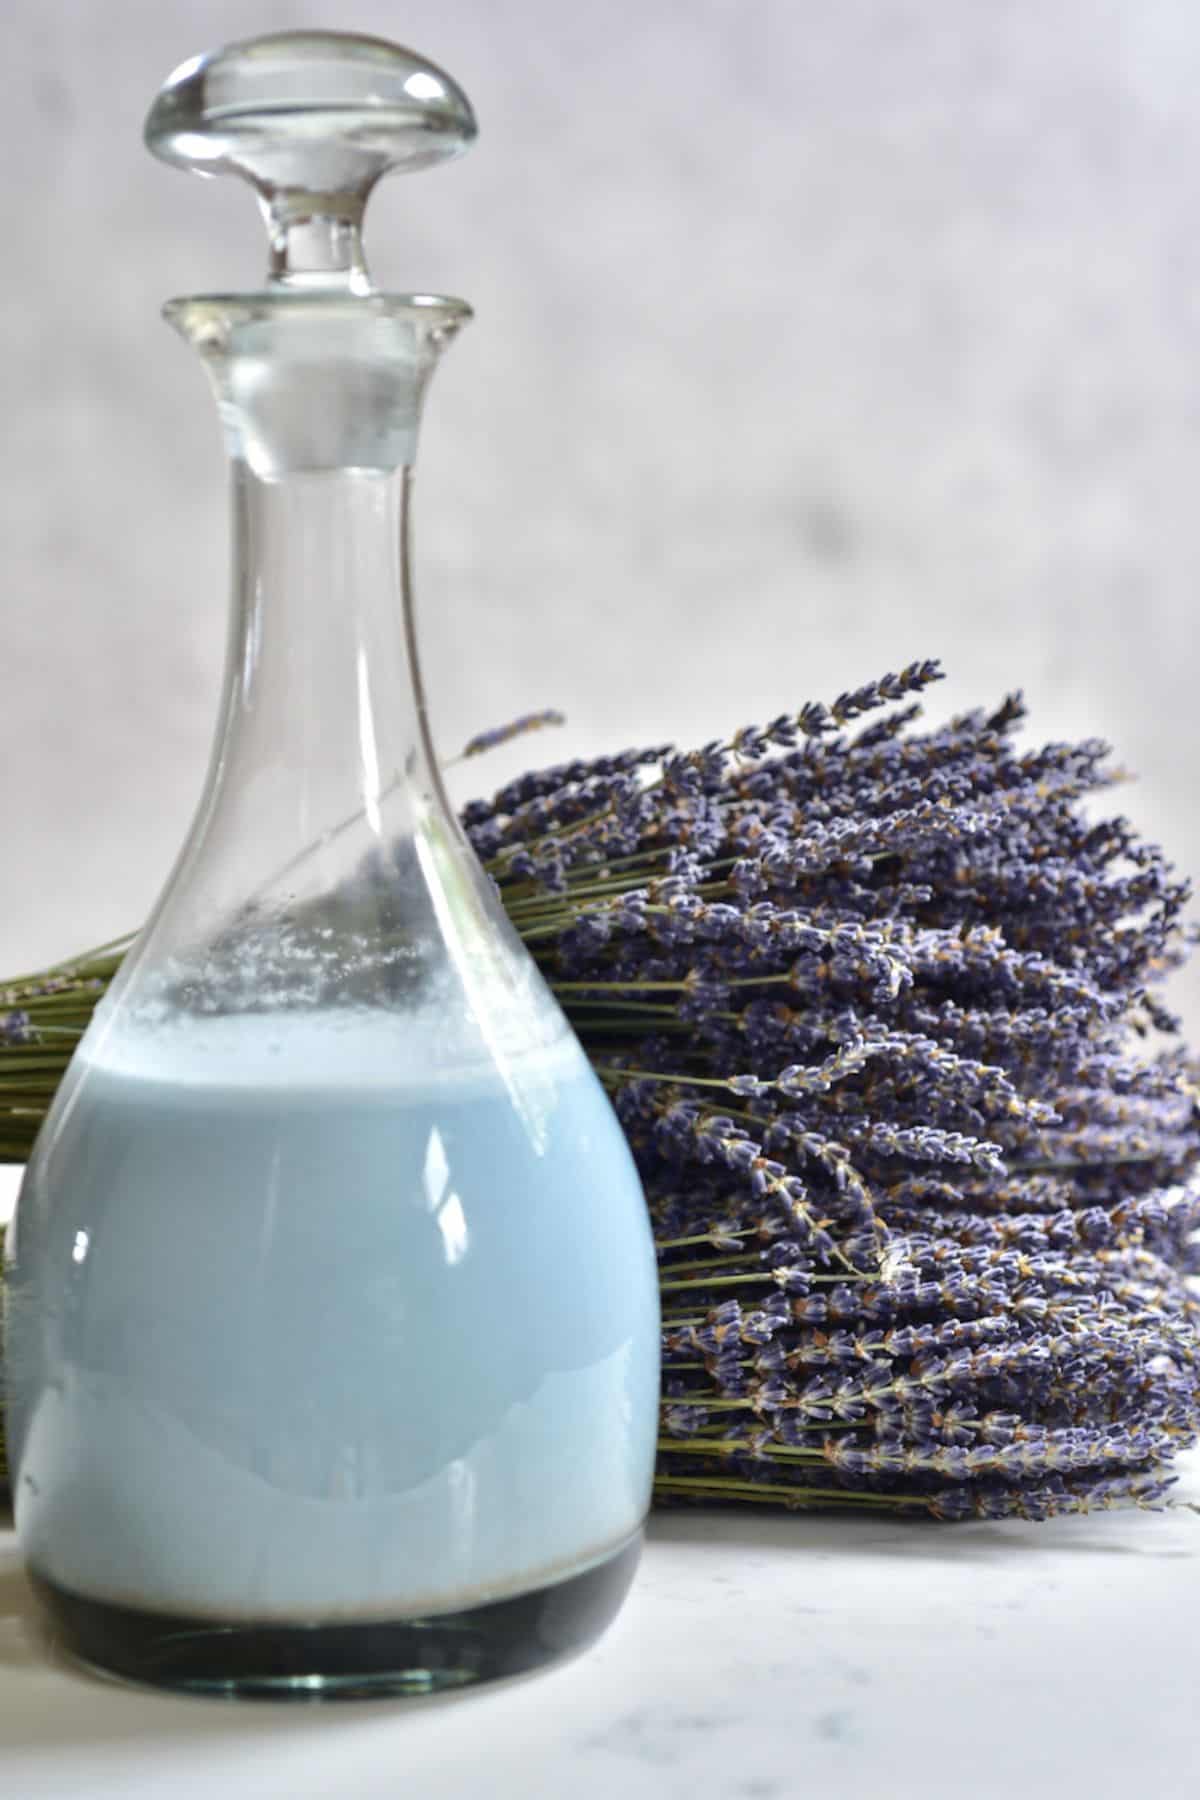 A bottle with Blue Milk from Star Wars with lavender behind it